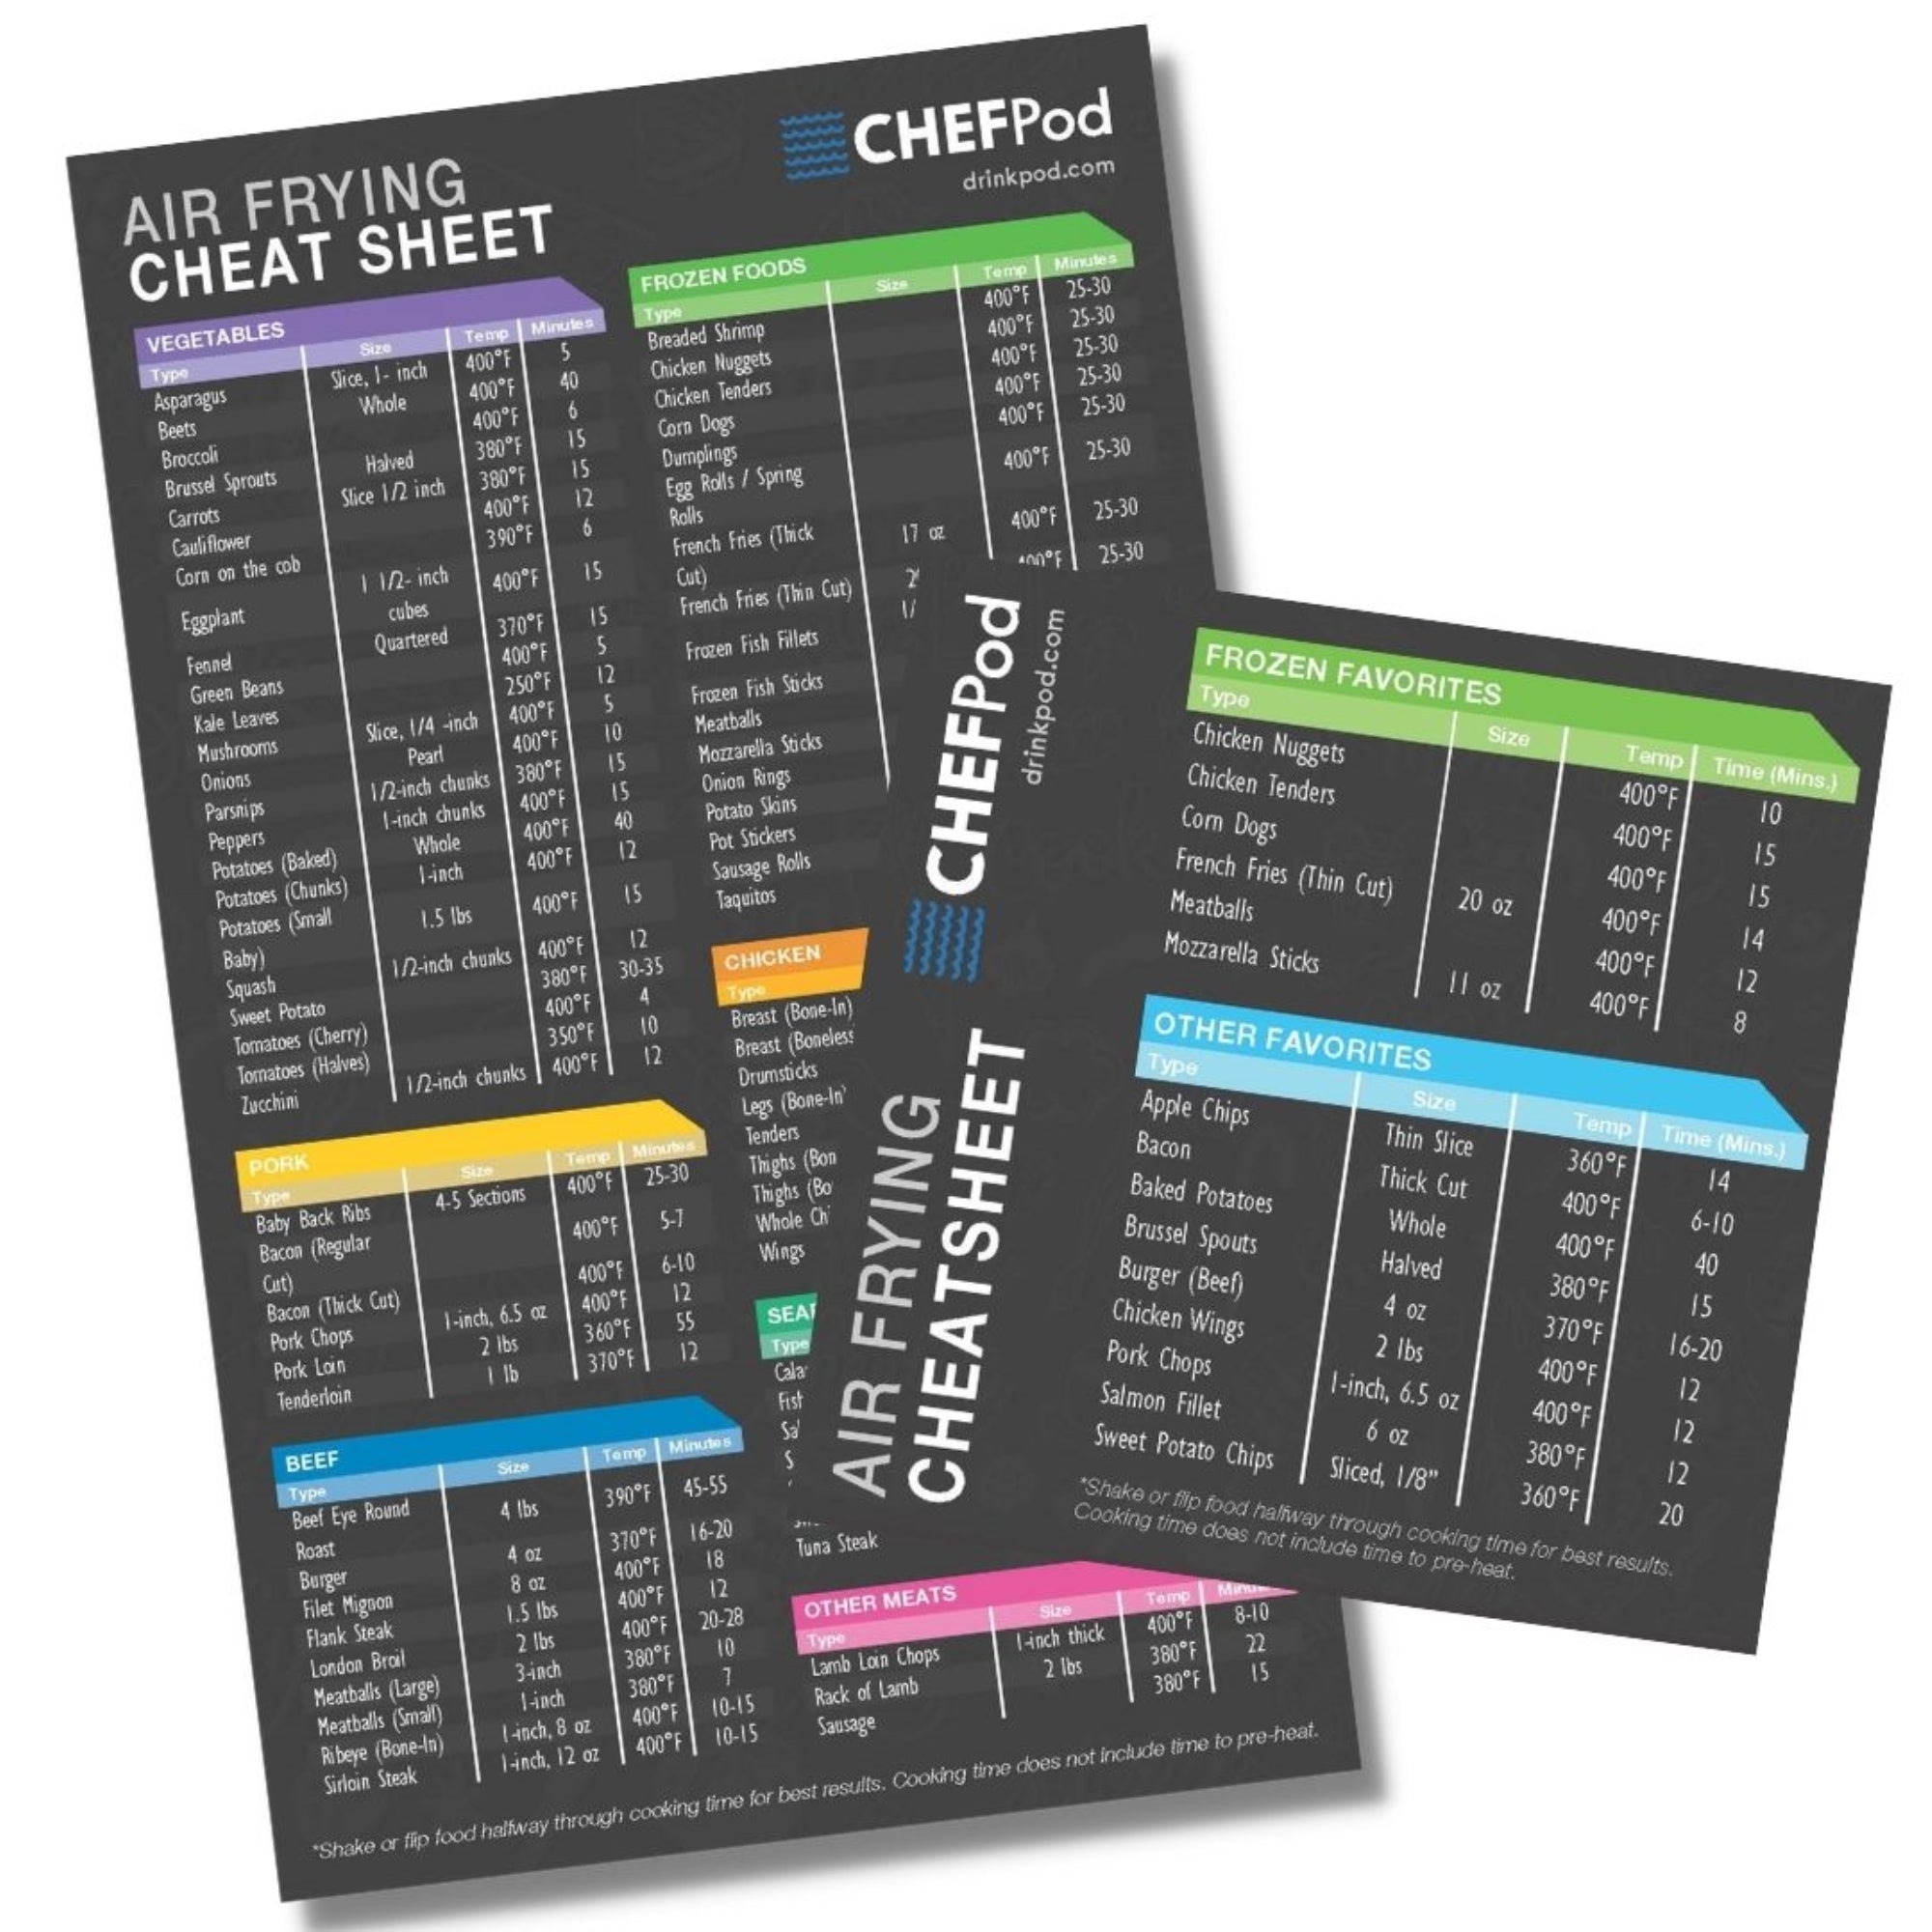 Air Fryer Cooking Times Magnetic Cheat Sheet - Extra Large Easy to Read